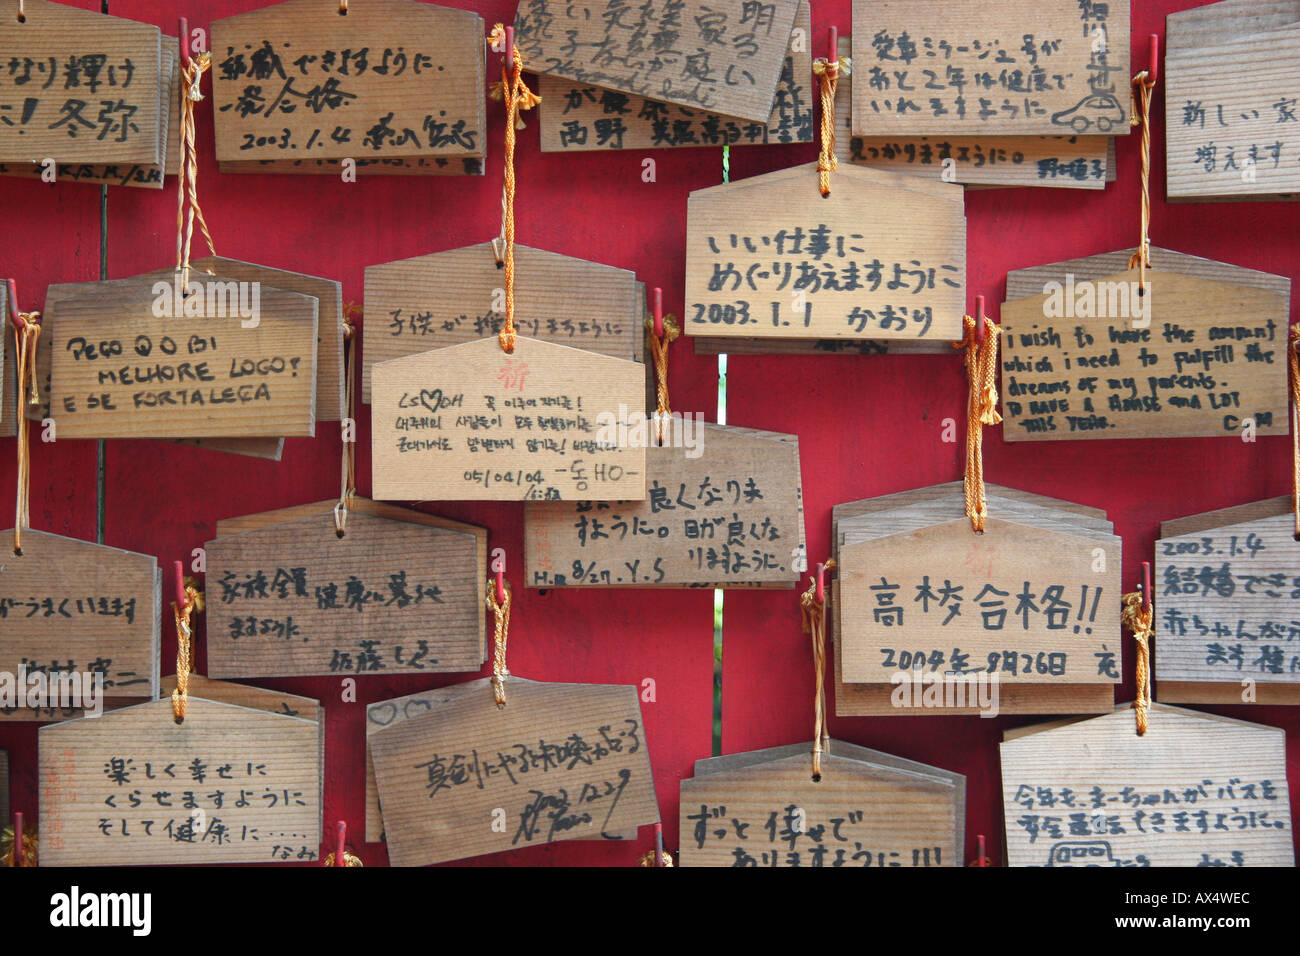 Wooden 'ema' prayer boards at a shinto shrine in Japan Stock Photo